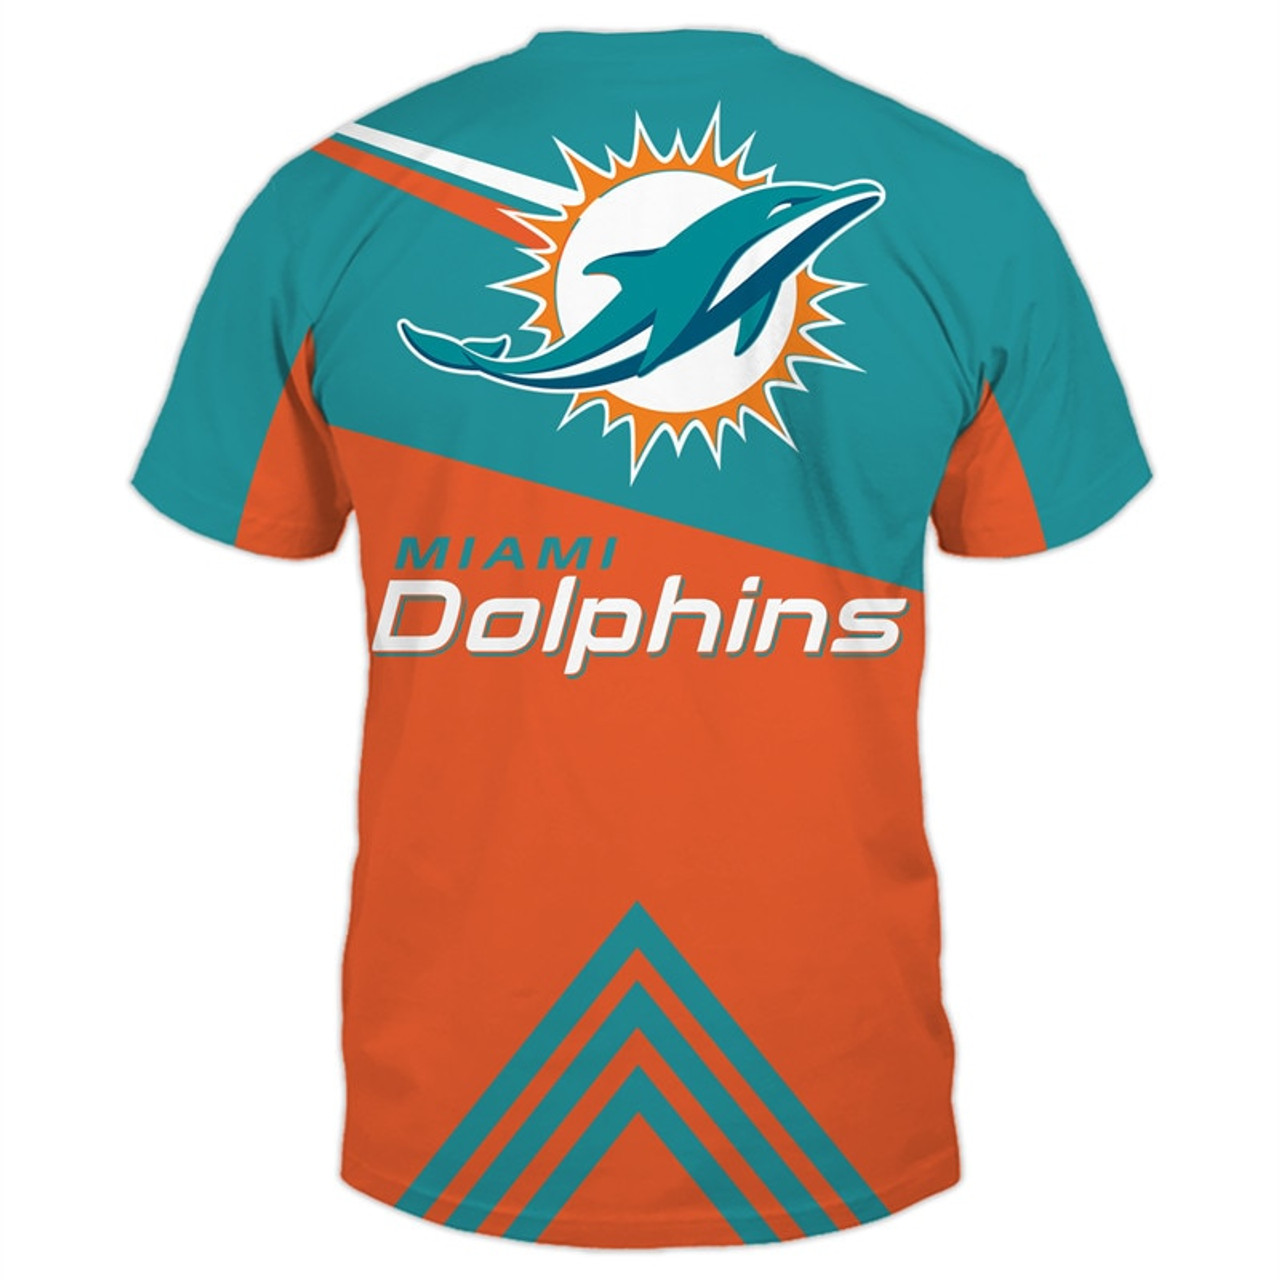  **(OFFICIAL-NEW-N.F.L.MIAMI-DOLPHINS-TRENDY-TEAM-TEES/CUSTOM-3D-DOLPHINS-OFFICIAL-LOGOS & OFFICIAL-CLASSIC-DOLPHINS-TEAM-COLORS/DETAILED-3D-GRAPHIC-PRINTED-DOUBLE-SIDED/ALL-OVER-GRAPHIC-PRINTED-DESIGNED/PREMIUM-N.F.L.DOLPHINS-GAME-DAY-TEAM-TEES)**